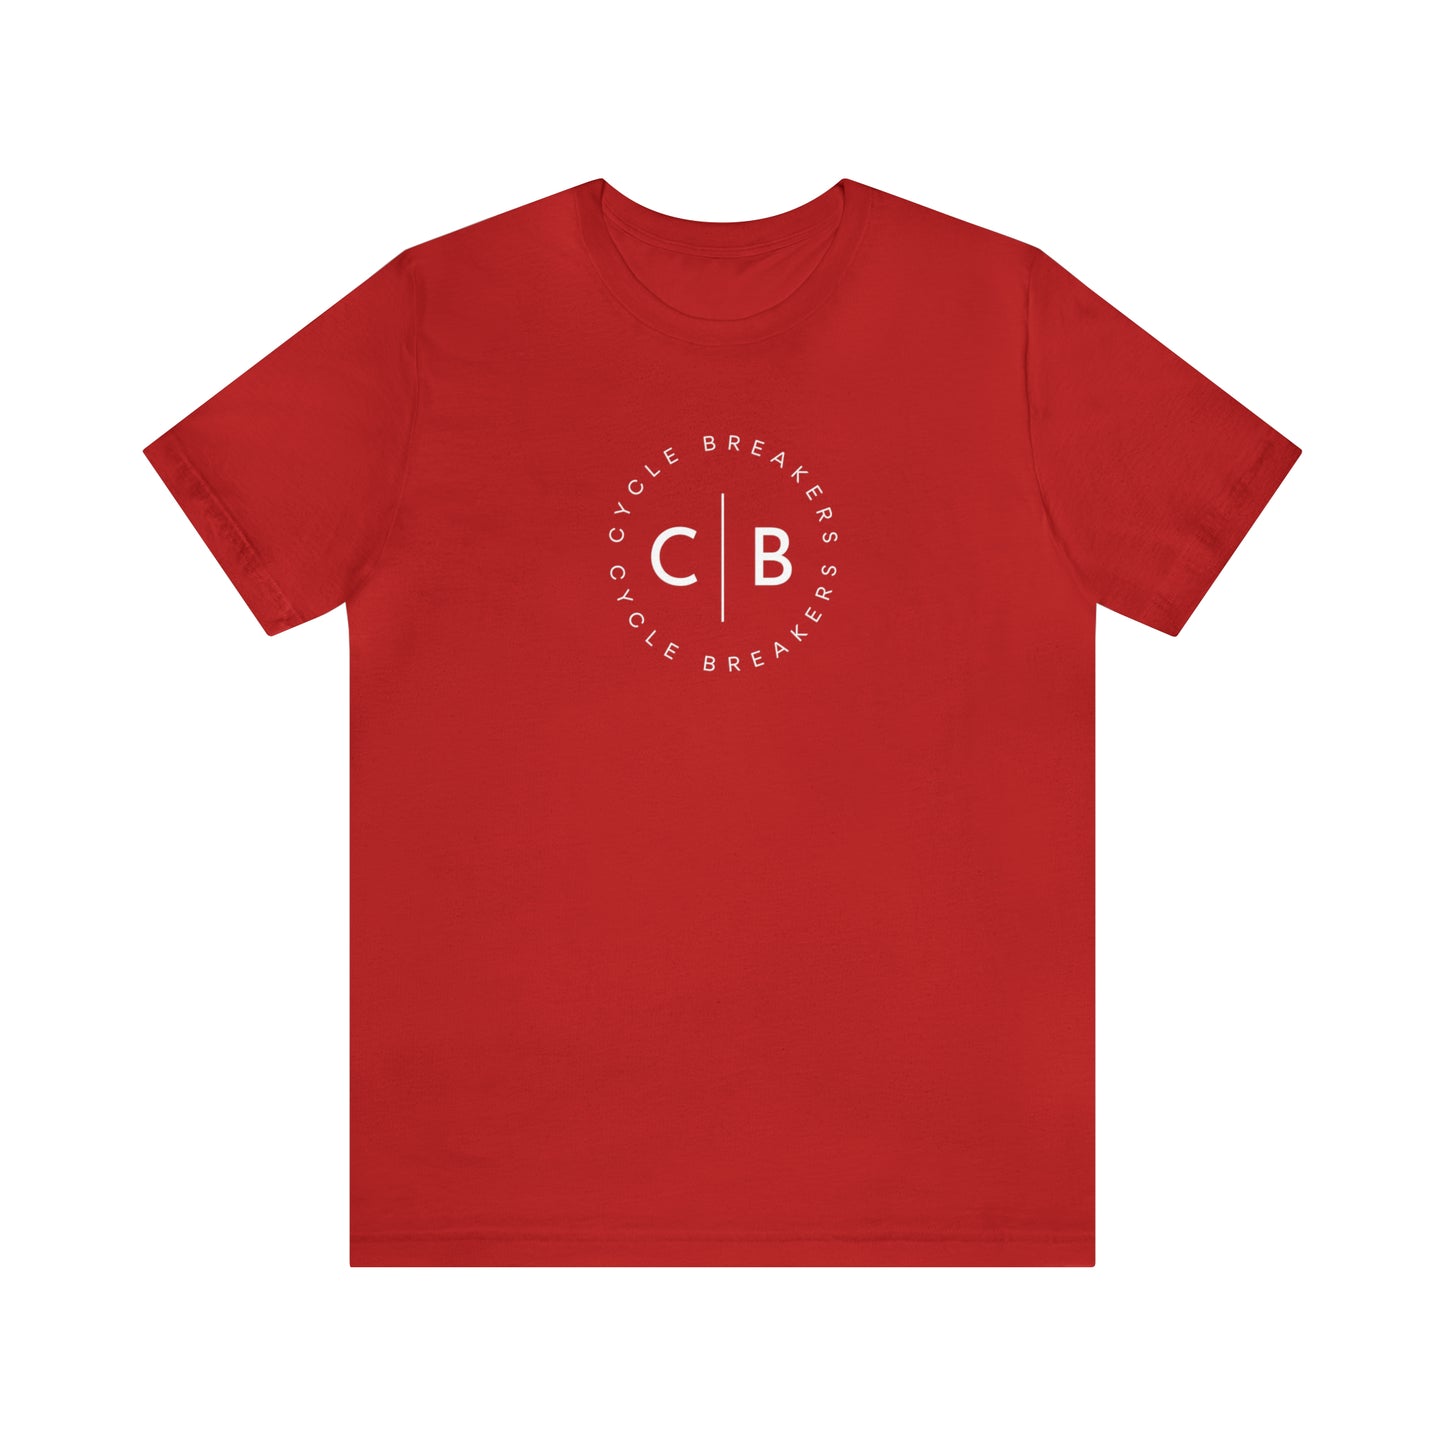 Cycle Breakers front logo t-shirt